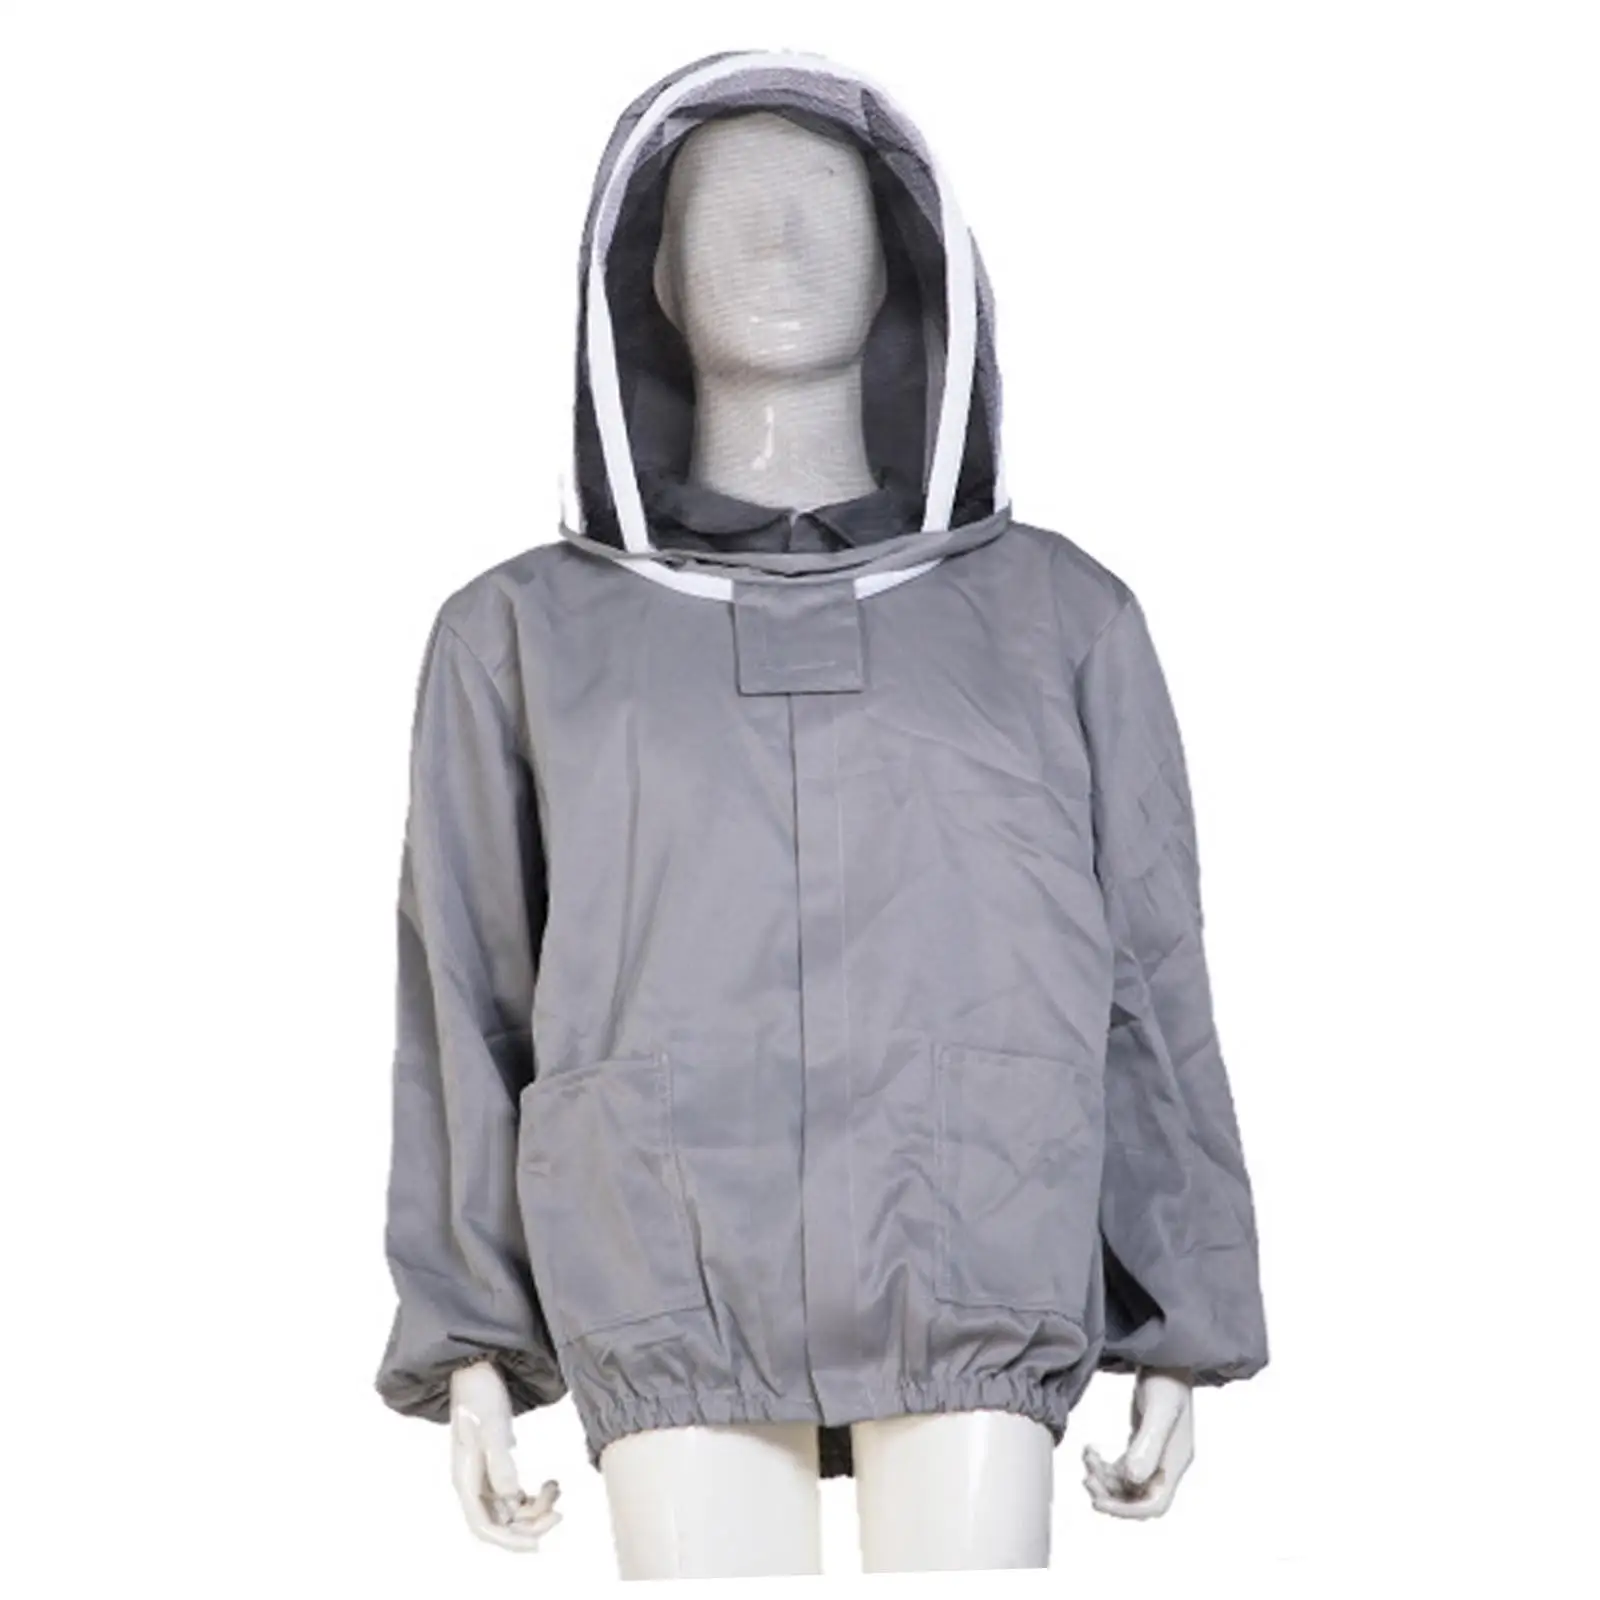 Beekeeper Jacket Breathable Professional with Fencing Veil Hood Premium with Pockets Farm Keeping Smock Suit for Beginners